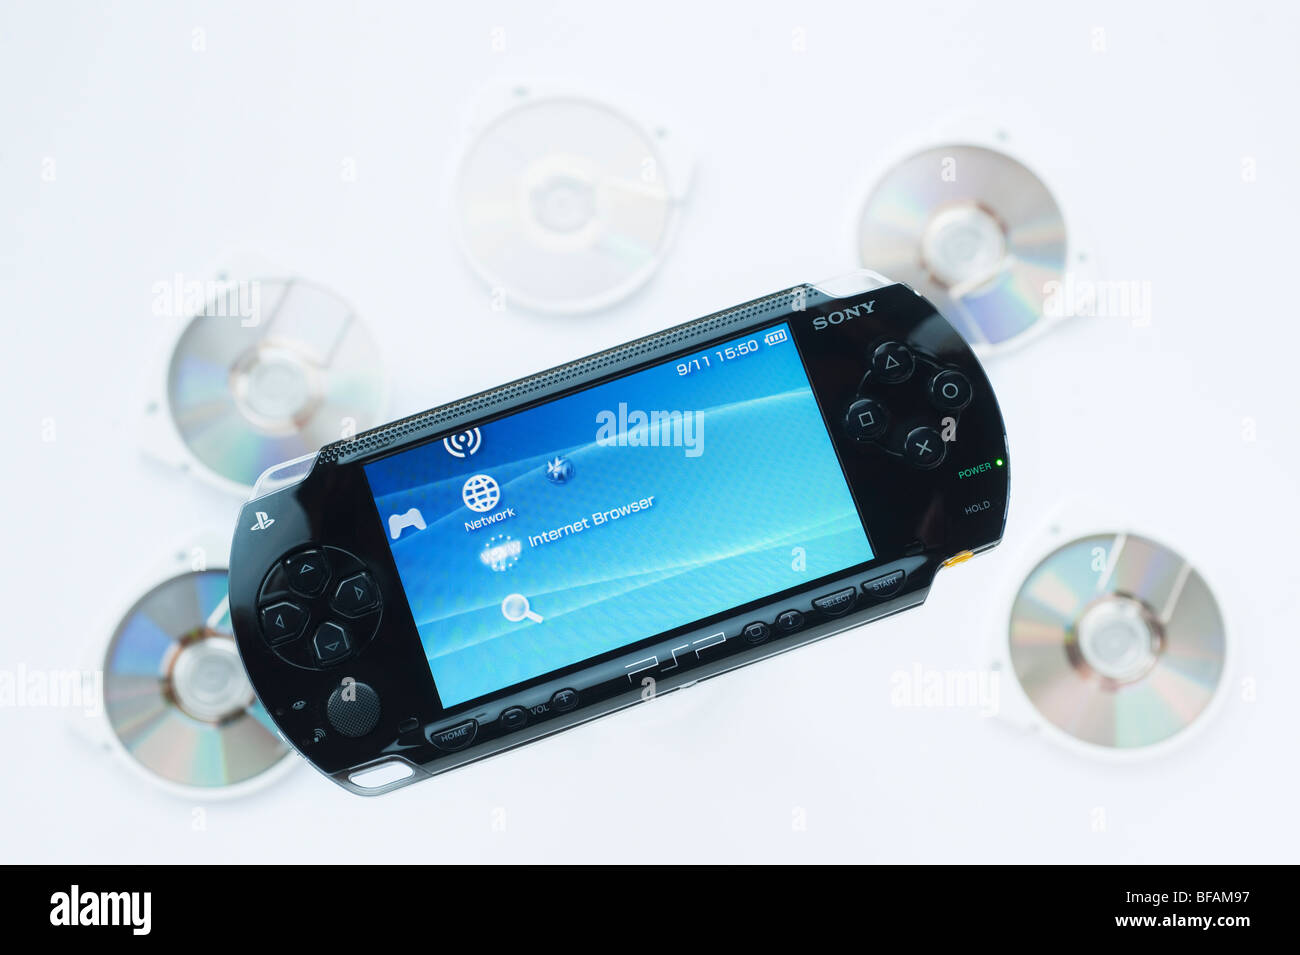 Sony Psp High Resolution Stock Photography and Images - Alamy